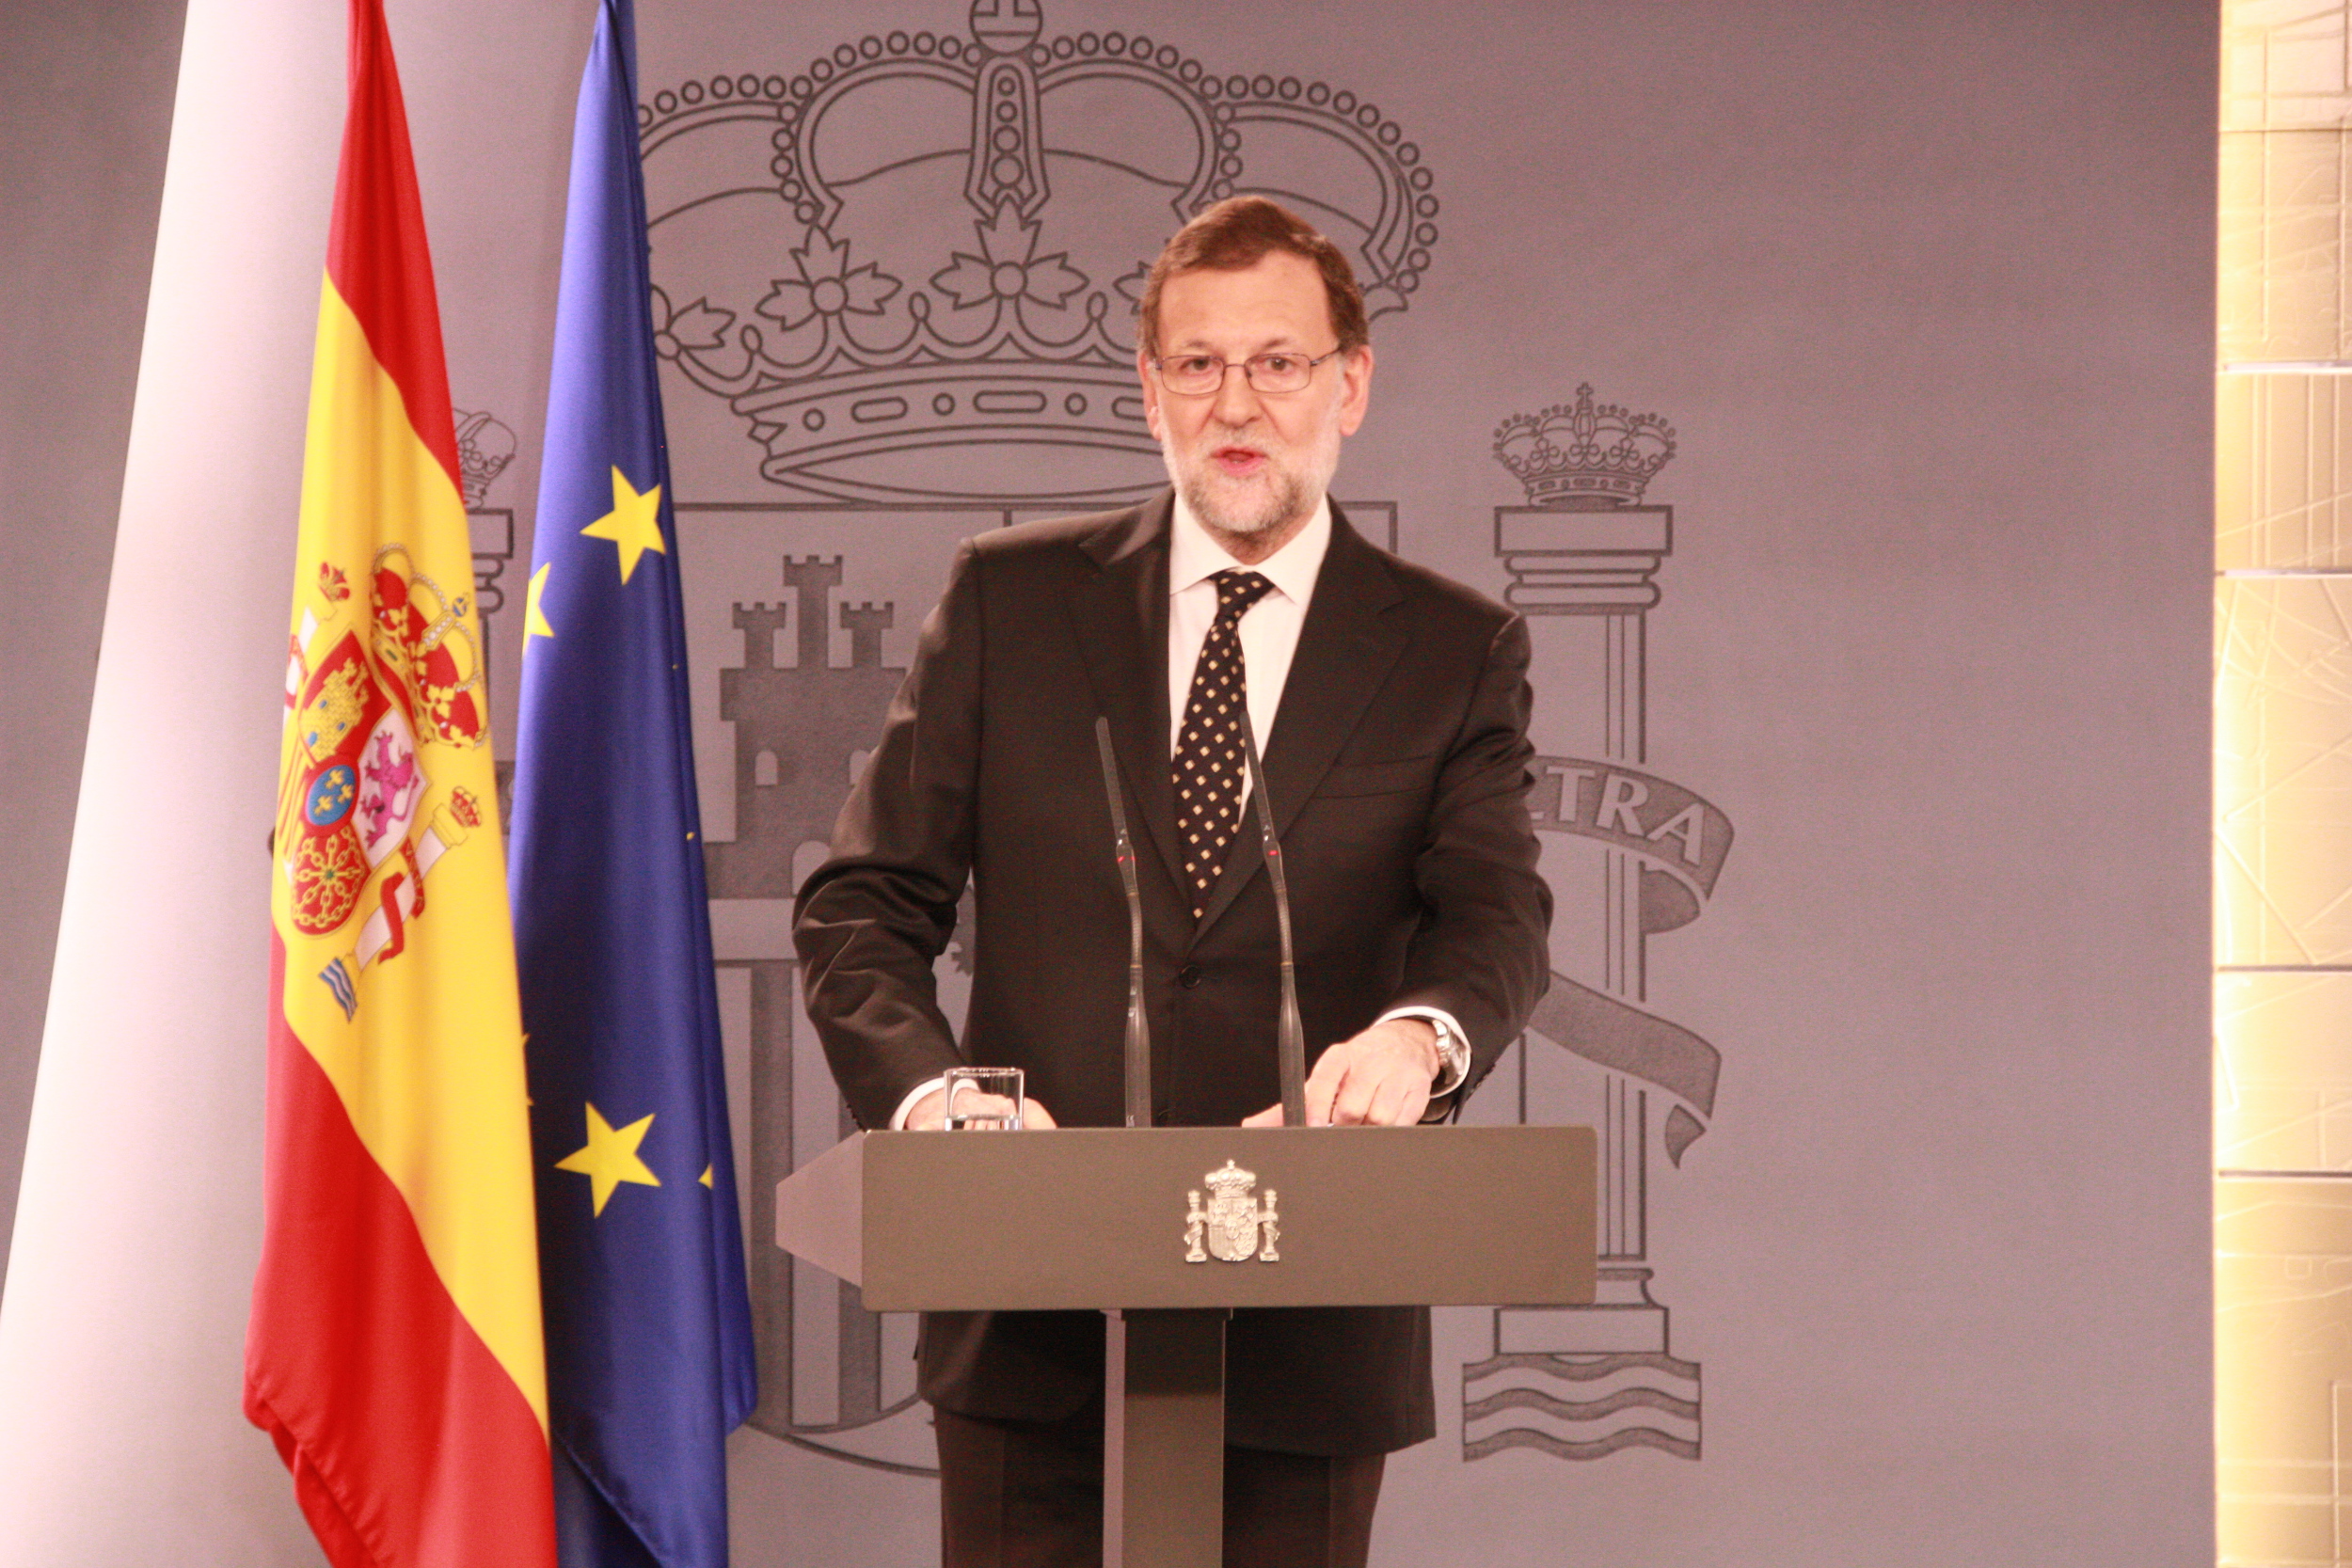 Image of Current Spanish Prime Minister, Mariano Rajoy during a press conference after Catalan President, Carles Puigdemont's investiture (by ACN)